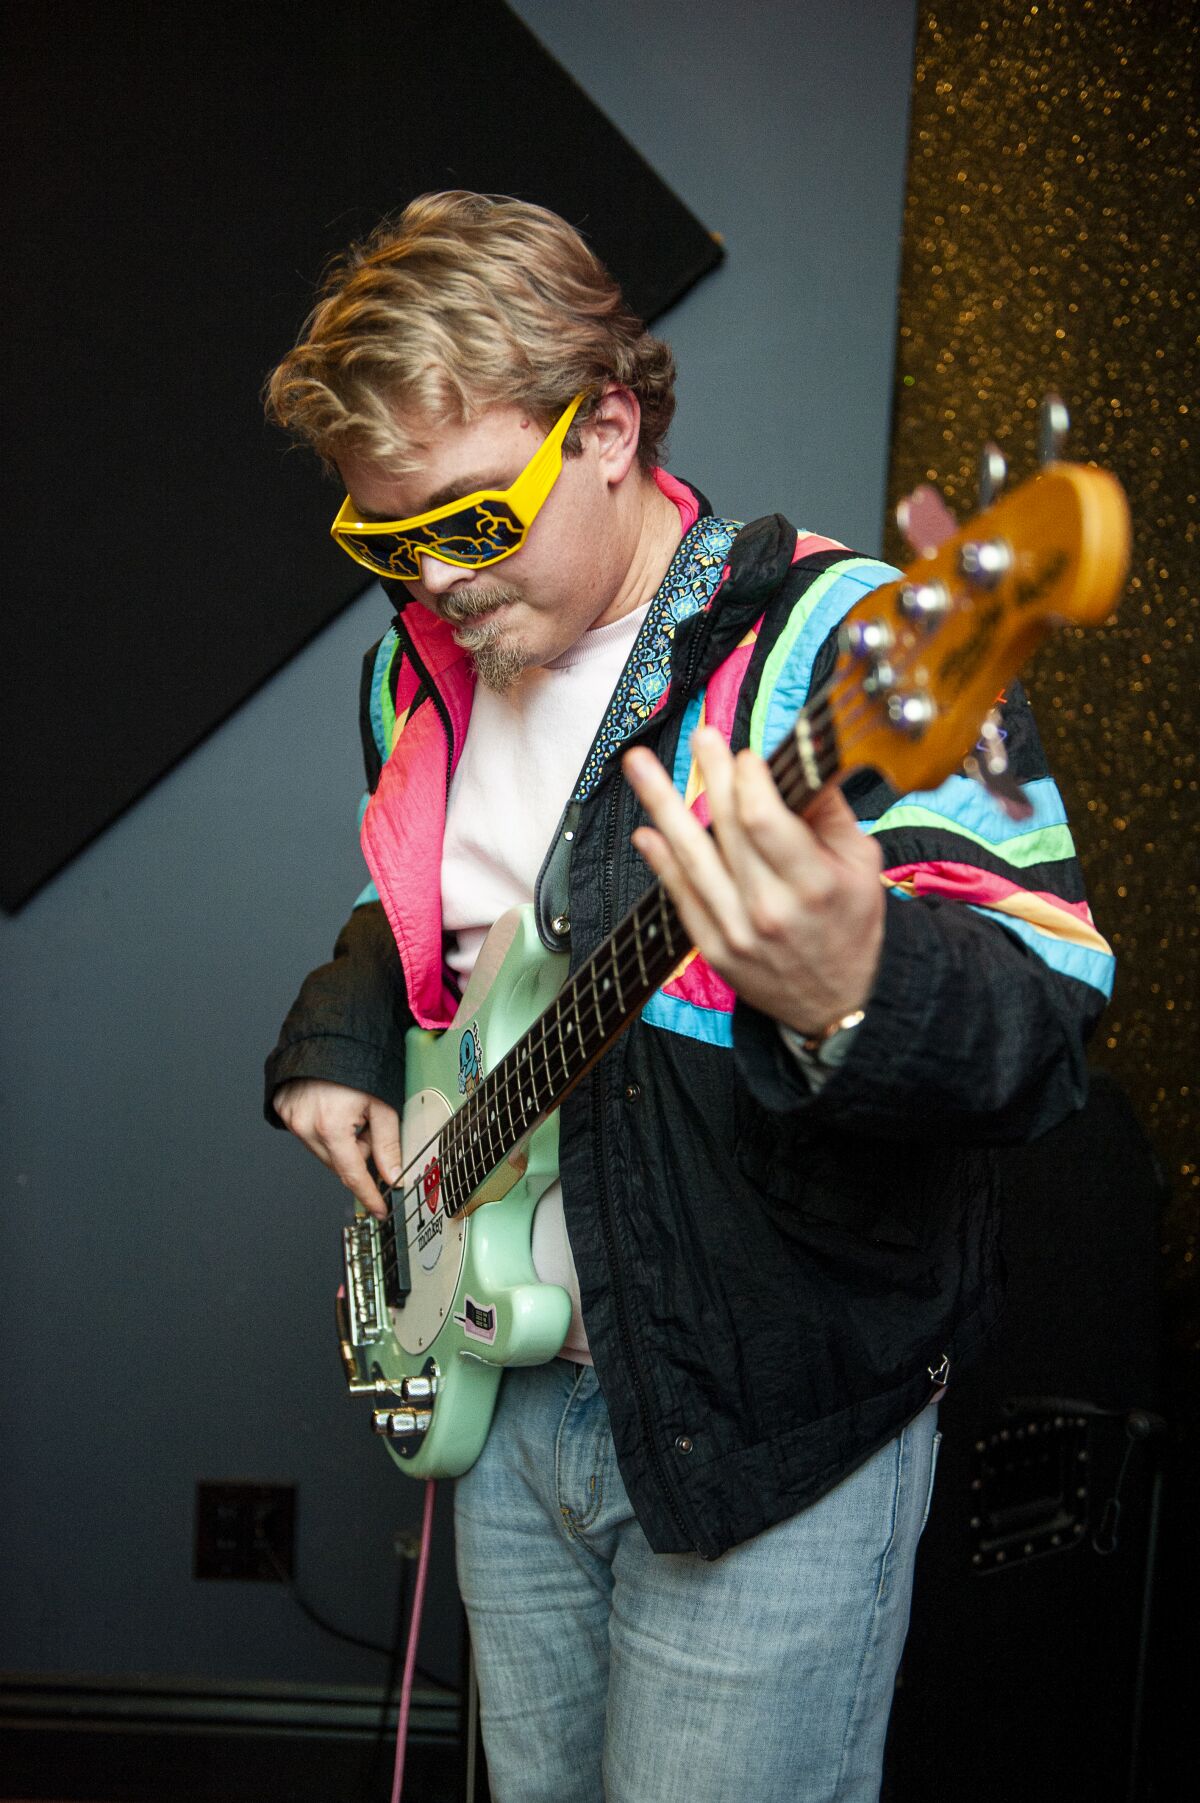 Bassist Alex Bravo of Scripps Ranch was the “final piece of the puzzle” for MOANS.